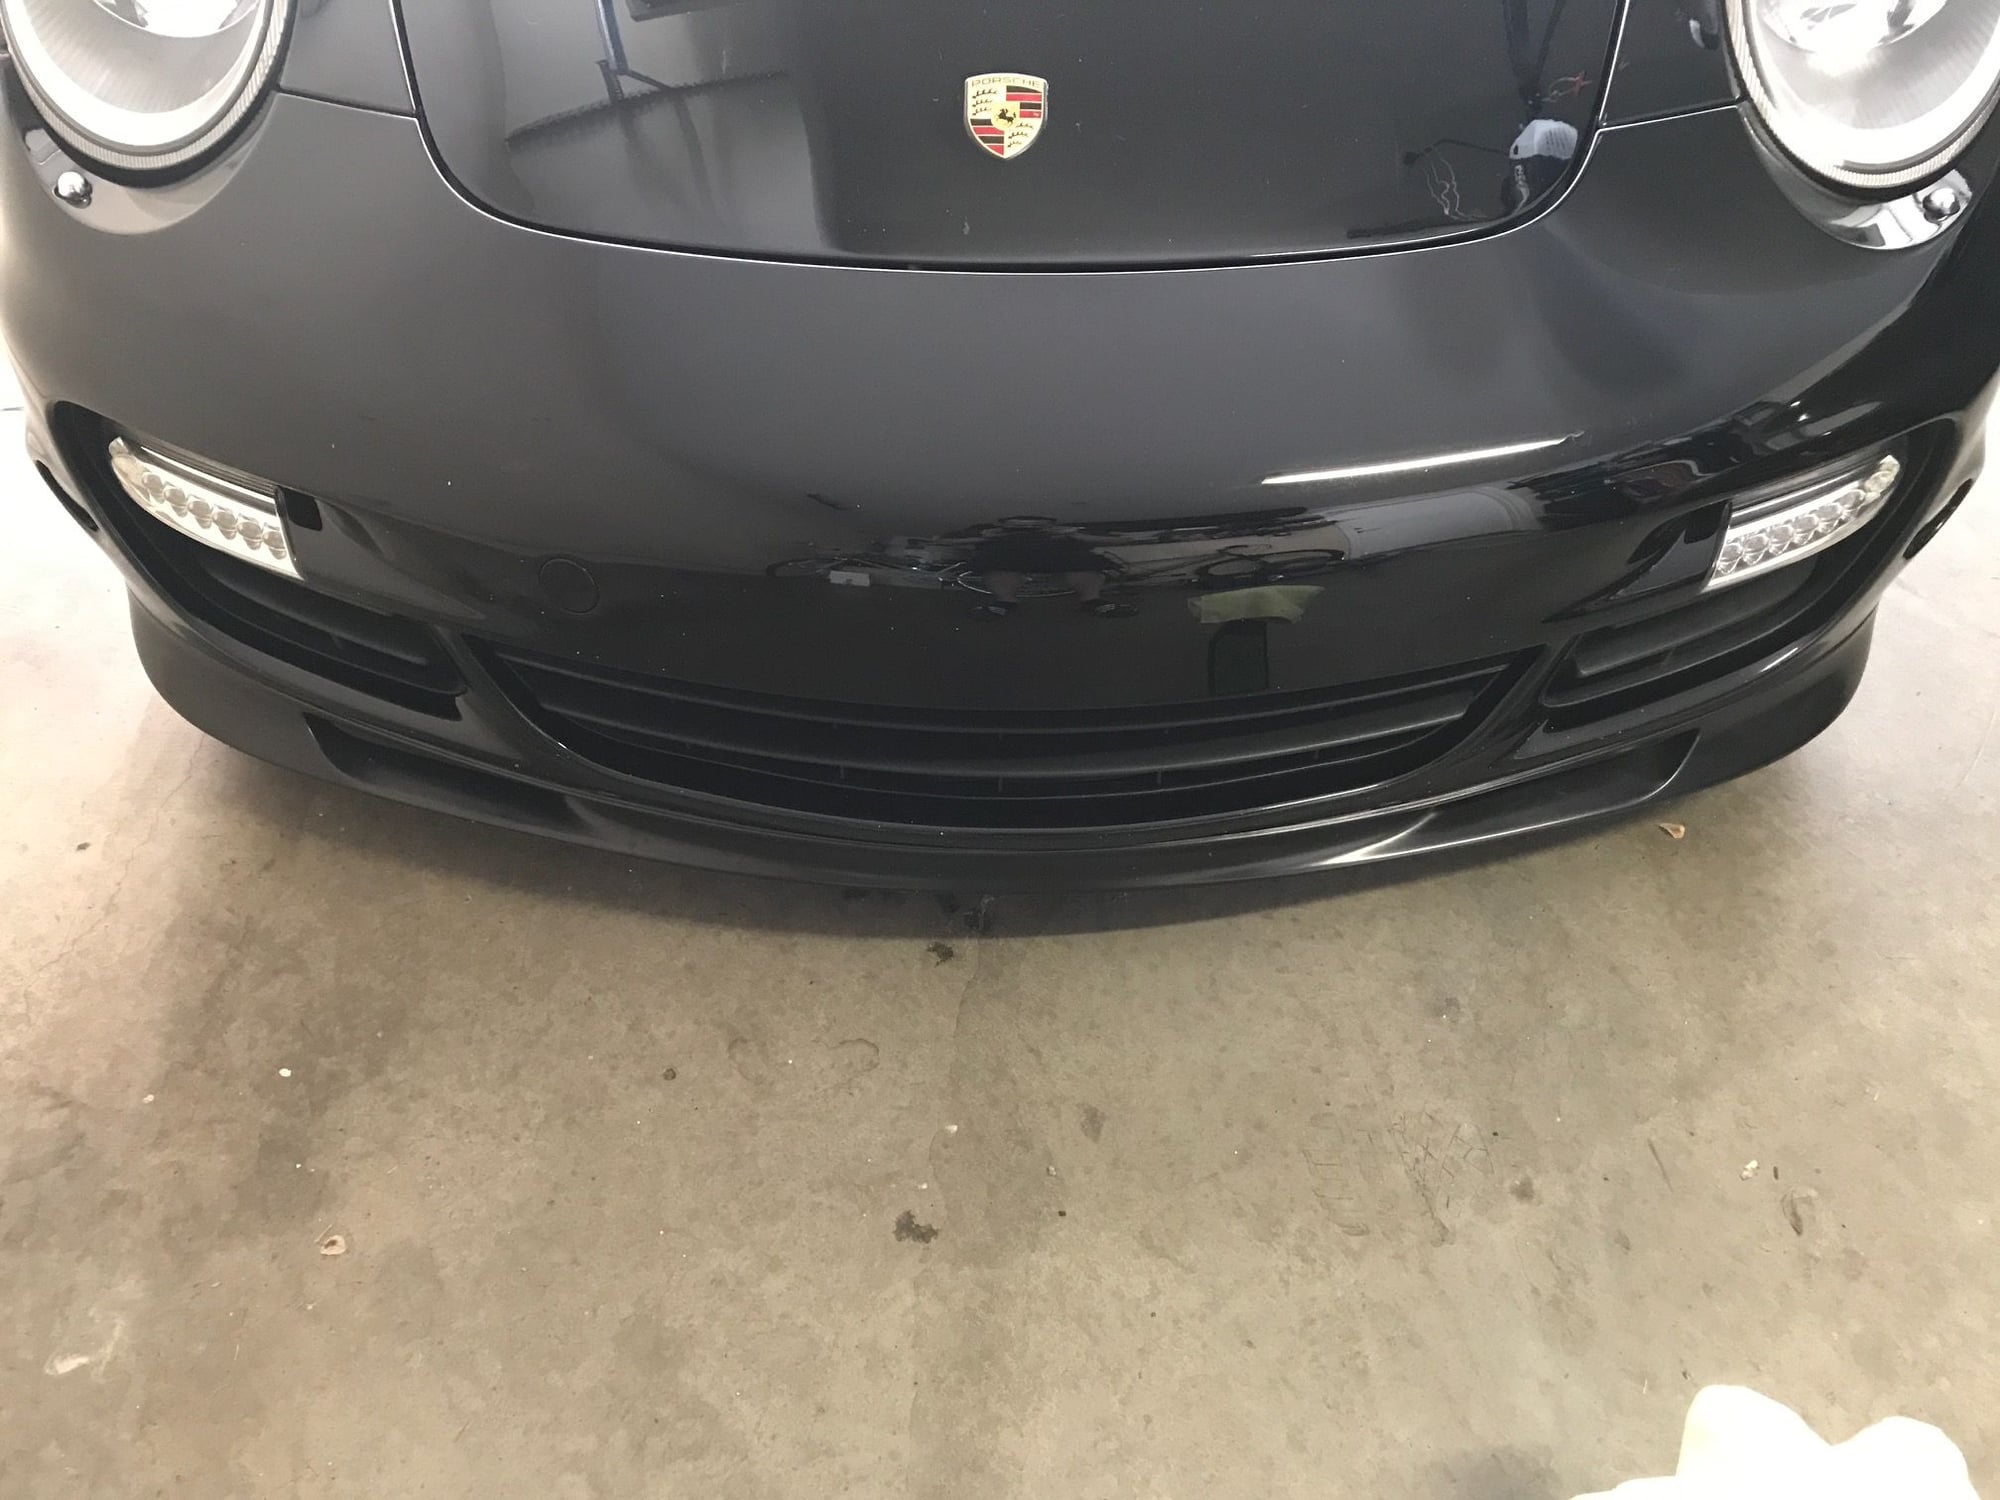 2007 Porsche 911 - 2007 Porsche 911 Turbo - Highly Optioned - Used - VIN WP0AD29937S783559 - 63,500 Miles - 6 cyl - AWD - Manual - Coupe - Black - San Jose, CA 95126, United States